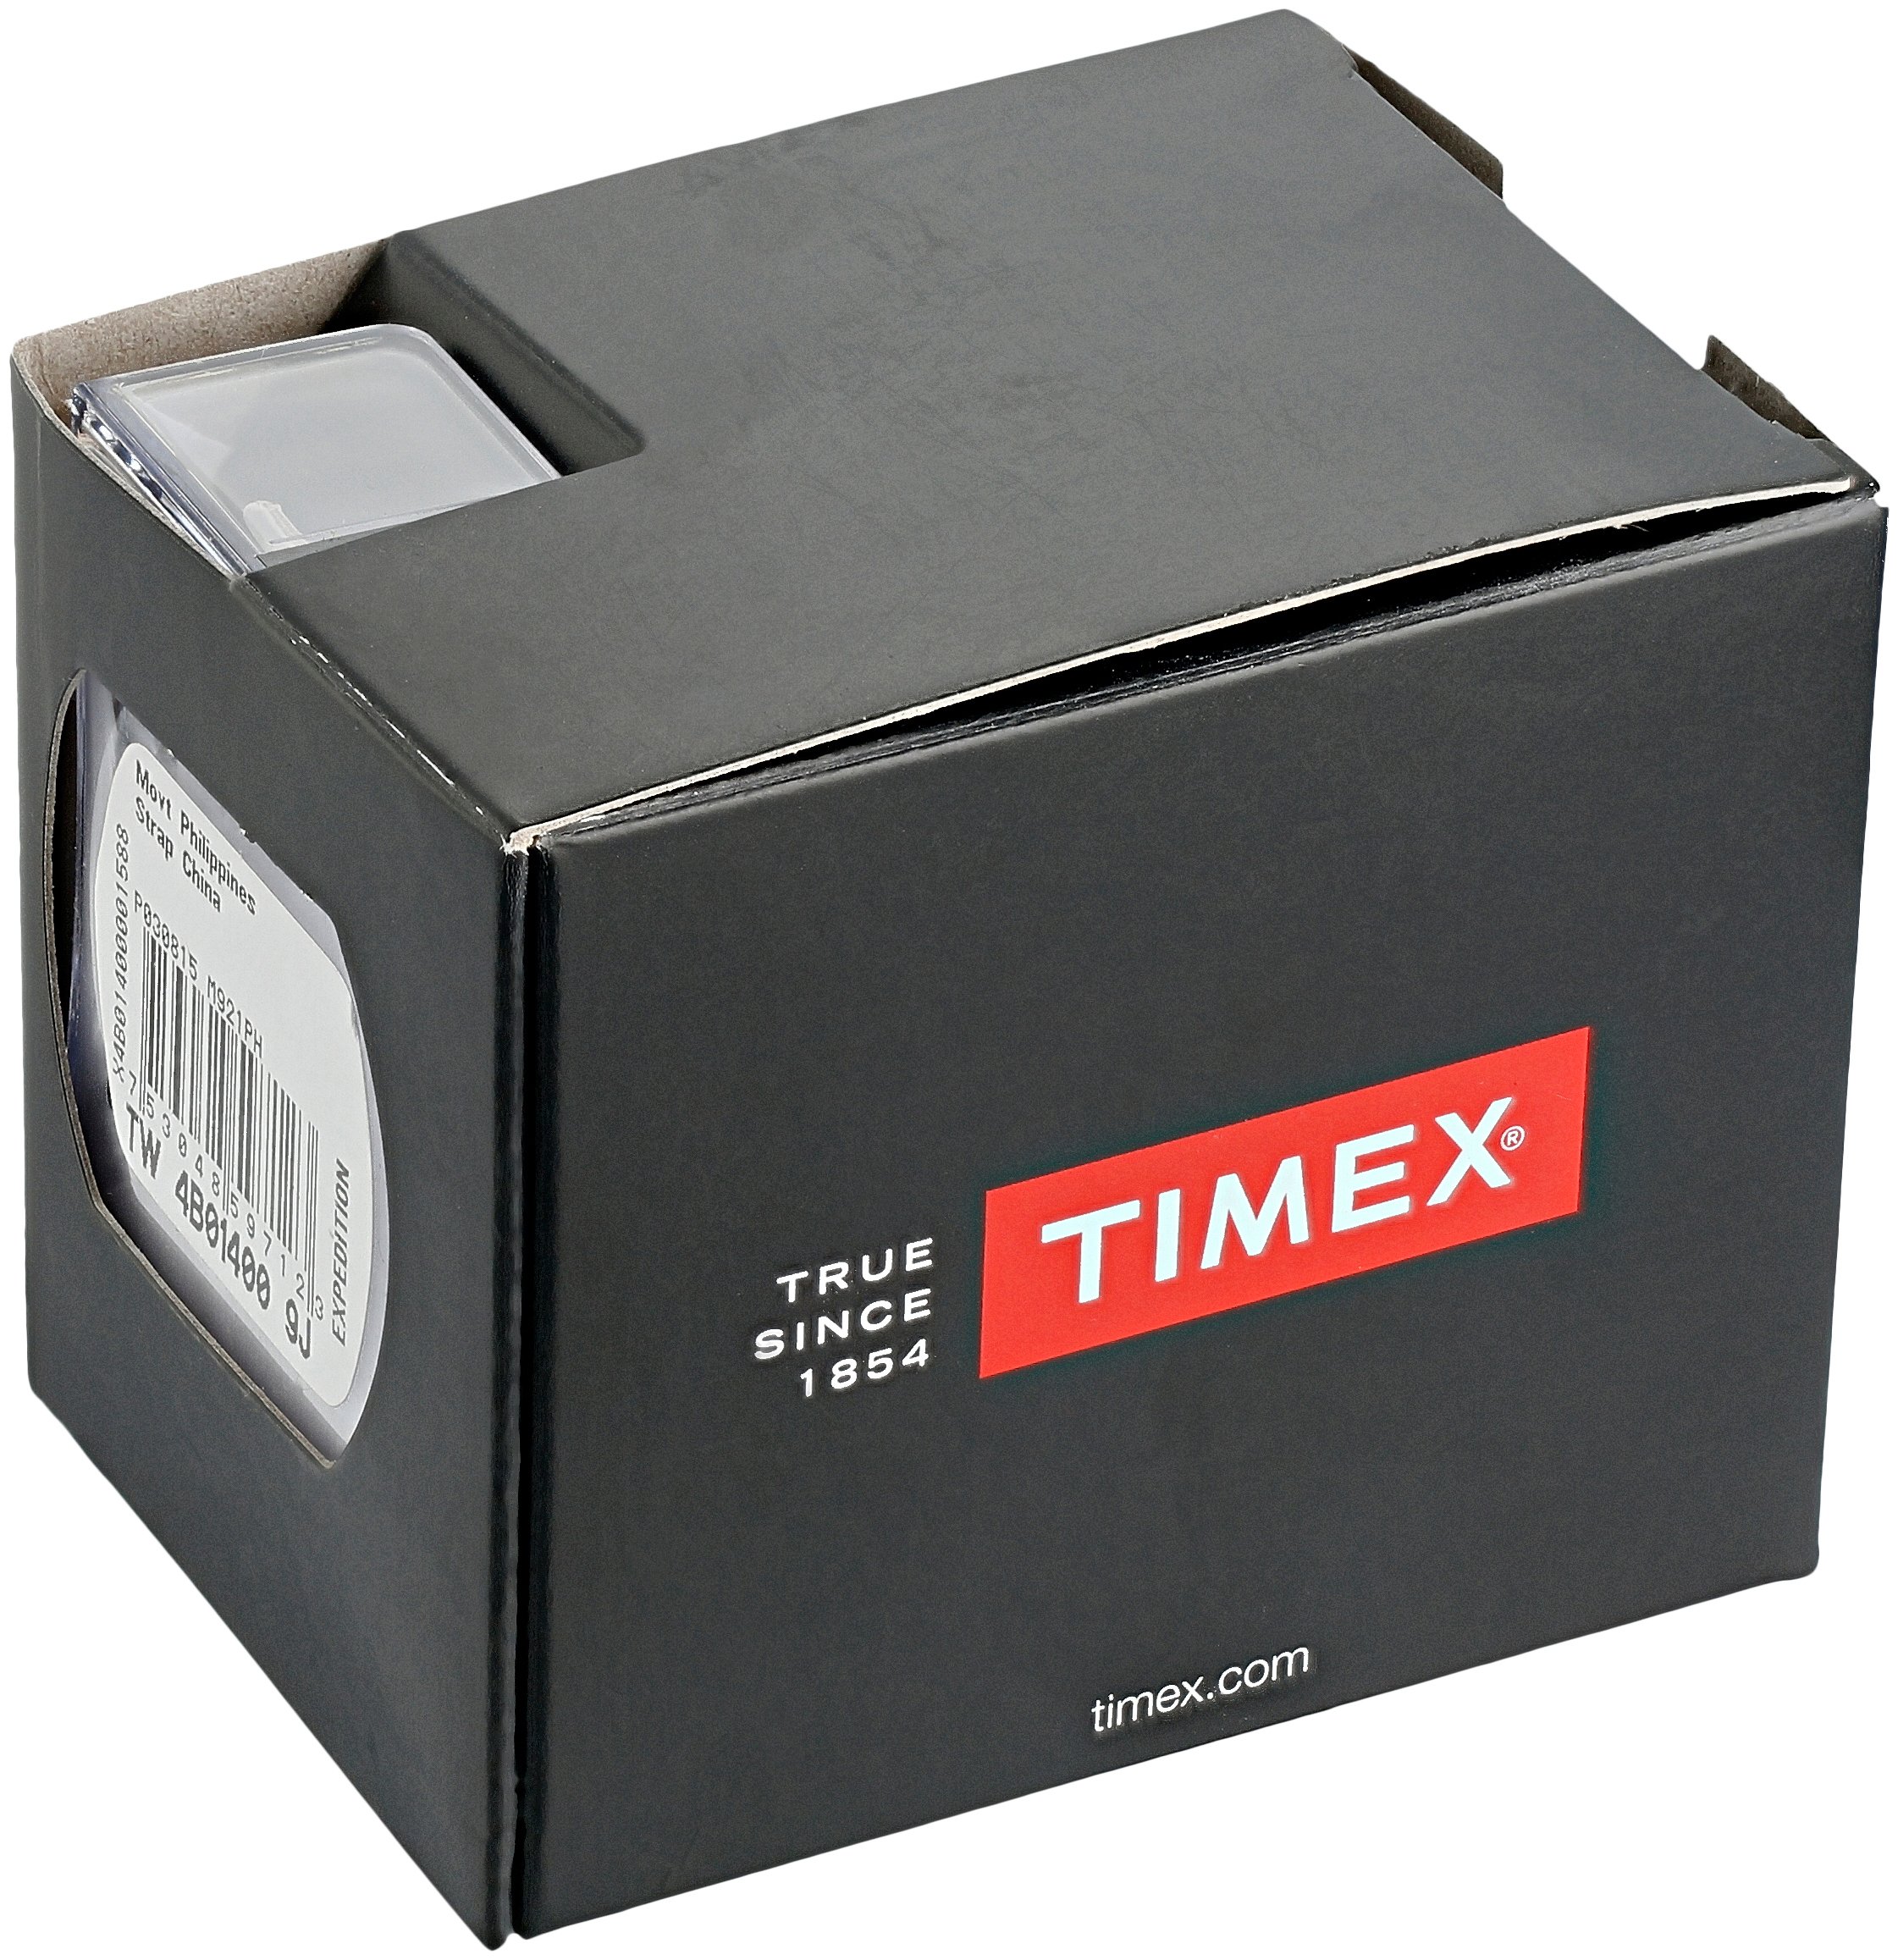 Timex Women's Easy Reader Leather Strap 30mm Watch